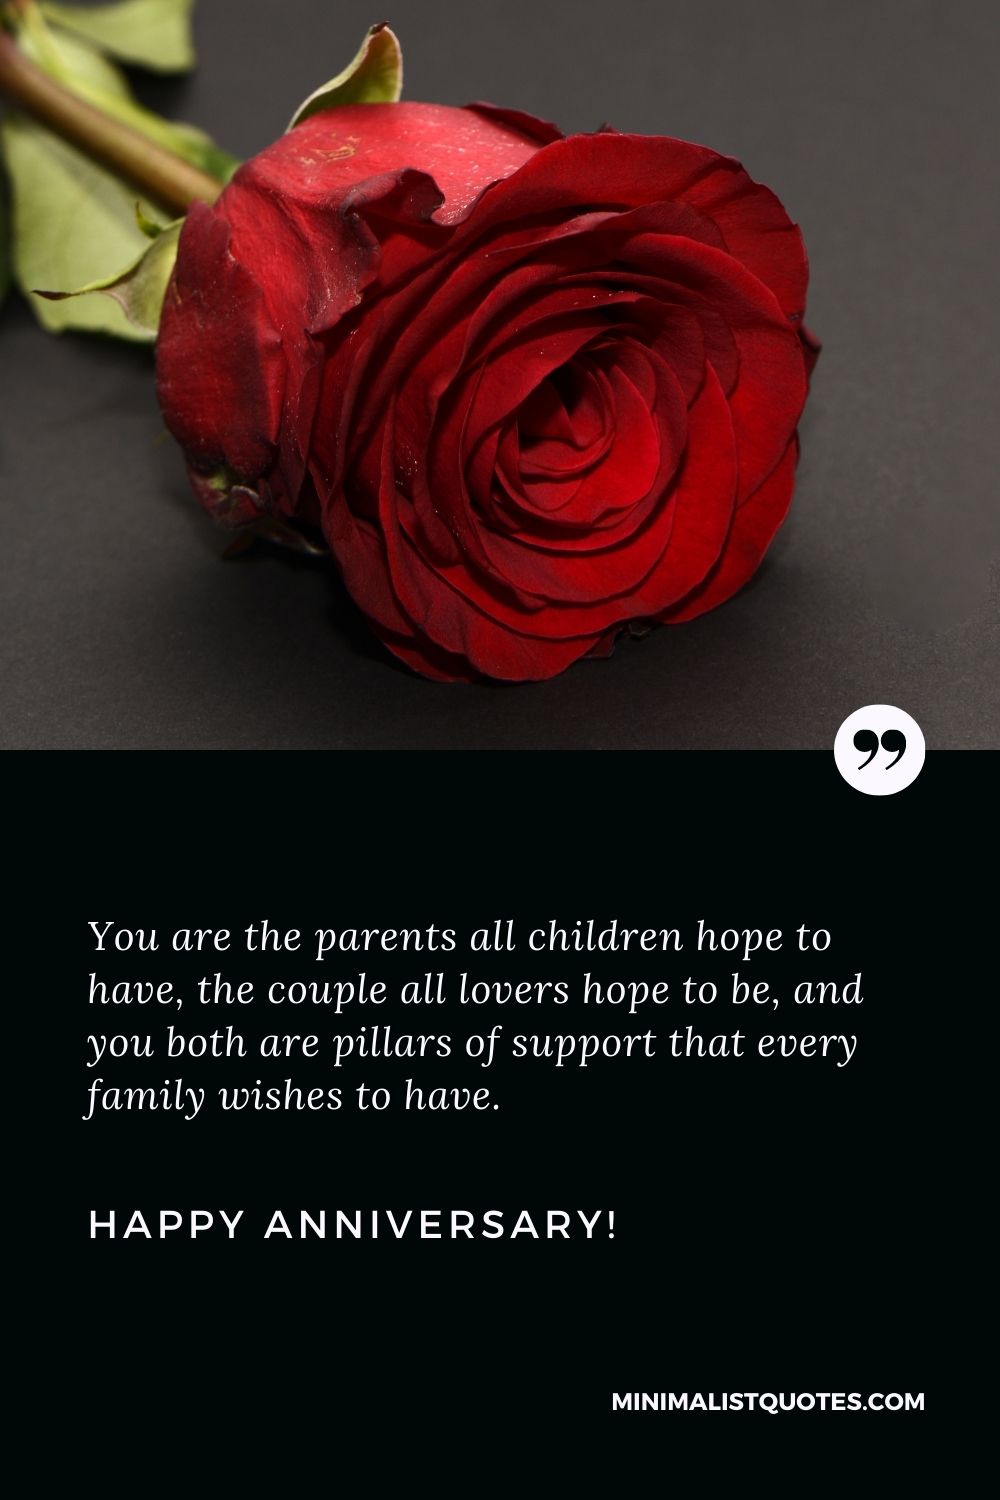 Happy anniversary mom and dad: You are the parents all children hope to have, the couple all lovers hope to be, and you both are pillars of support that every family wishes to have. Happy Anniversary!